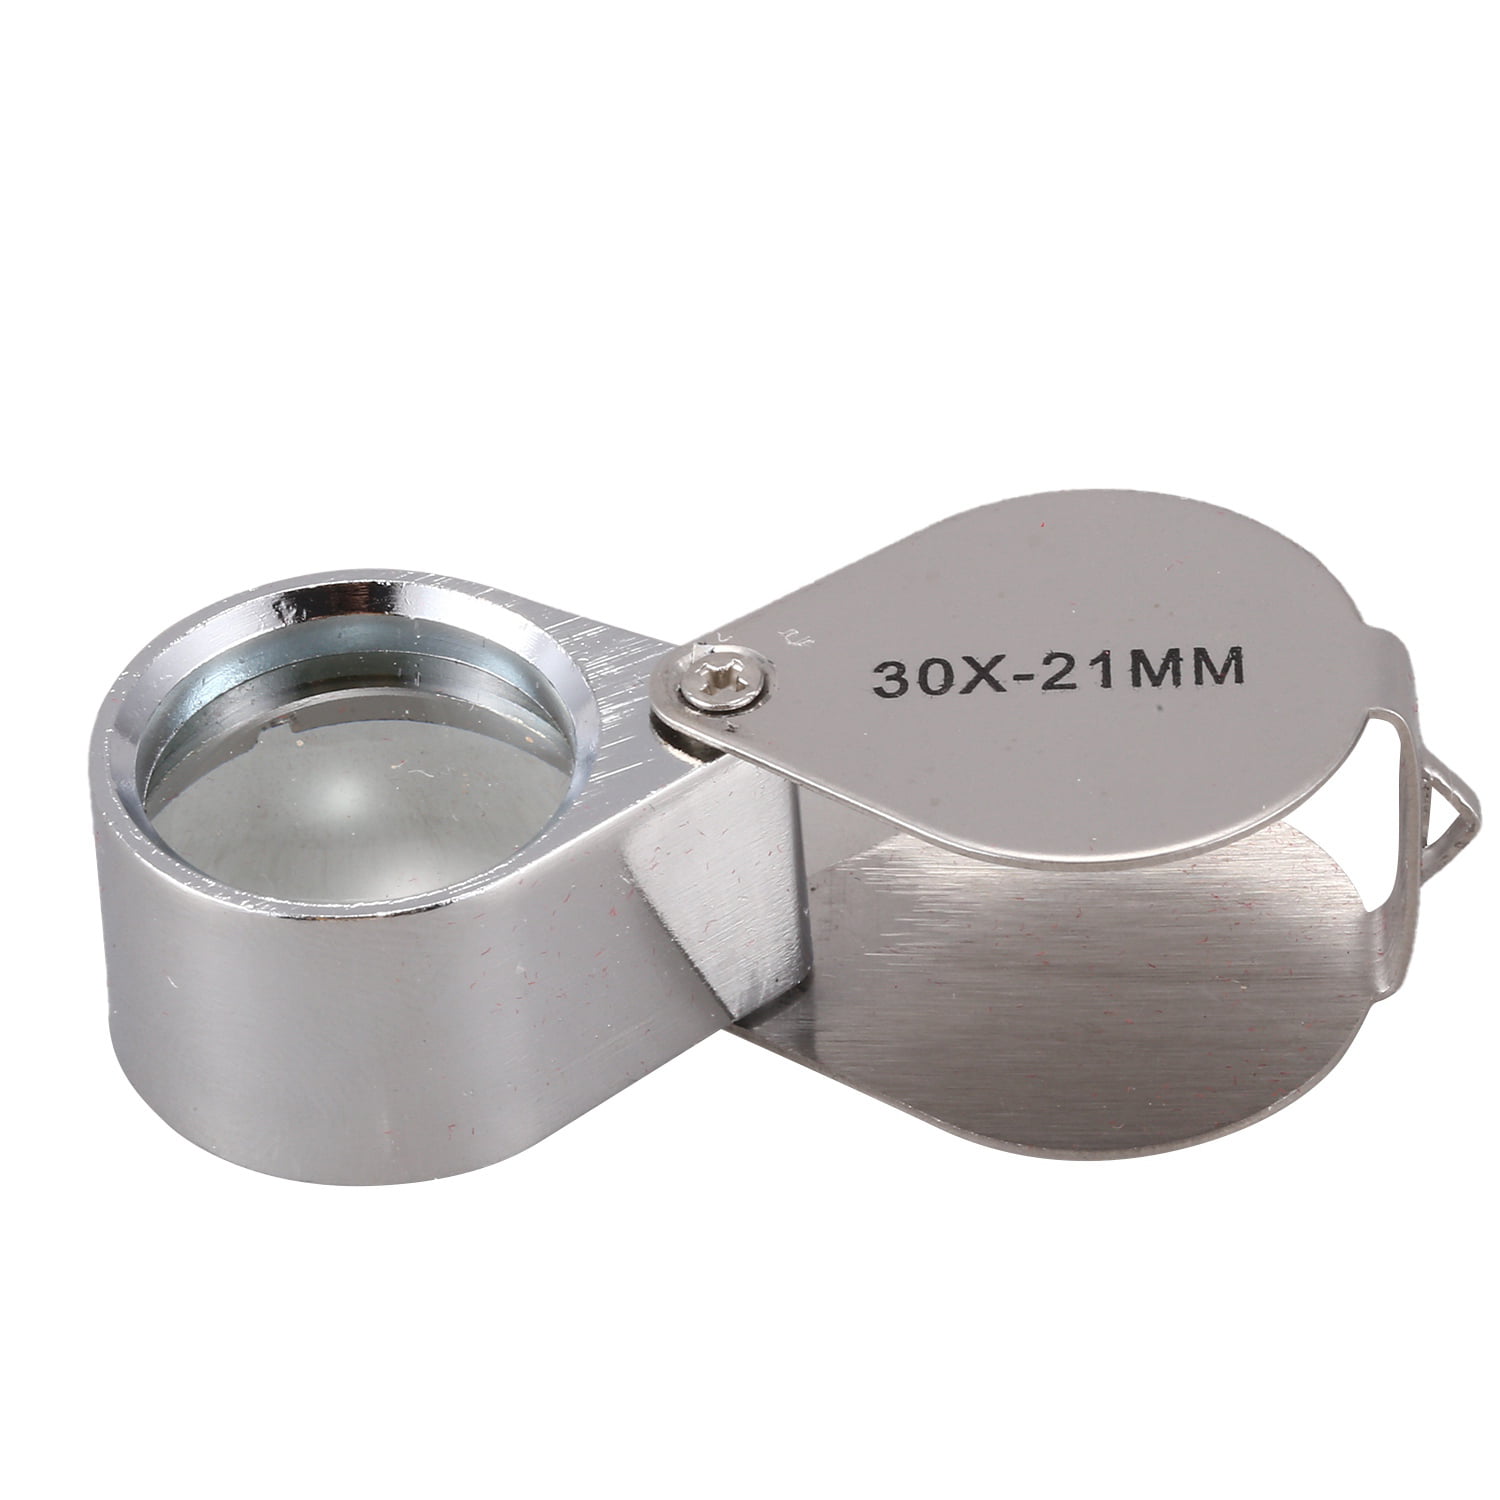 New 30 x 21mm Glass Jeweller Loupe Eye Magnifier With Case Silver Gold Hallmarks 